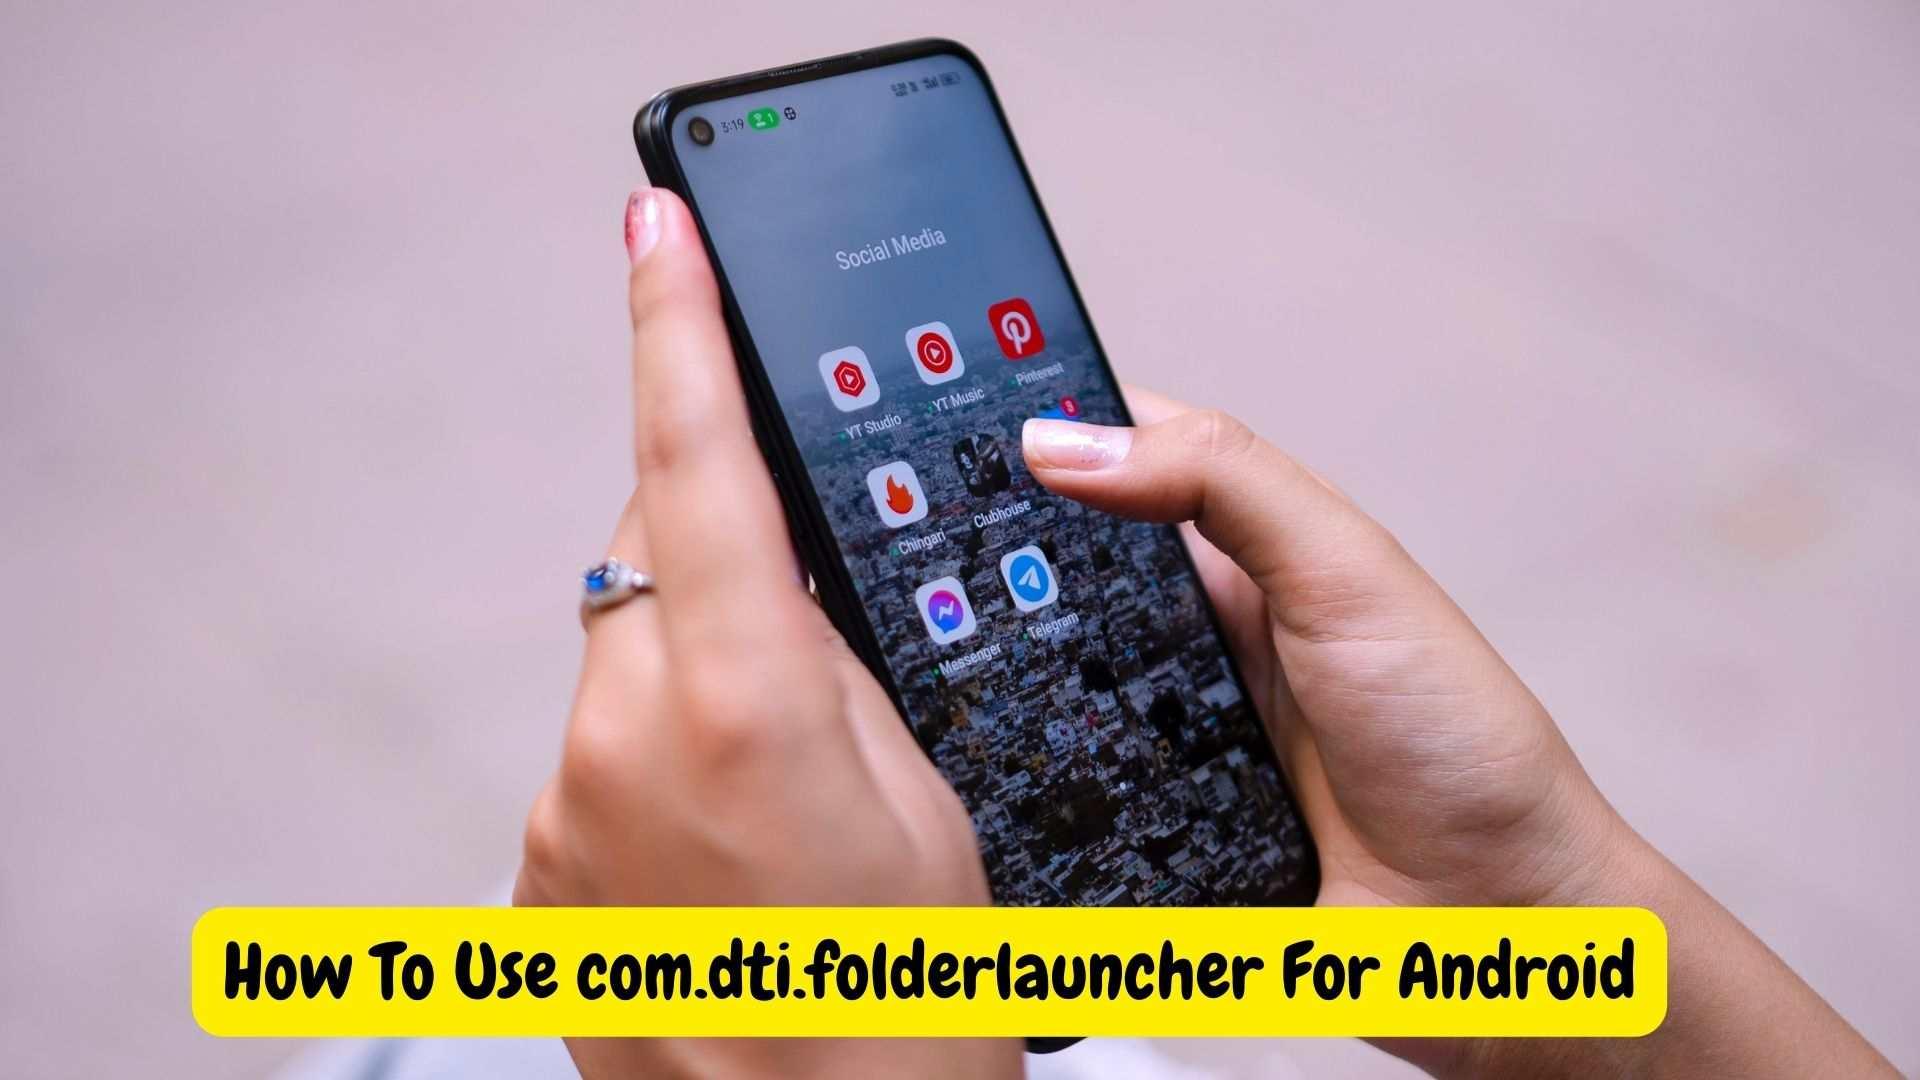 How to install com.dti.folderlauncher in Android.